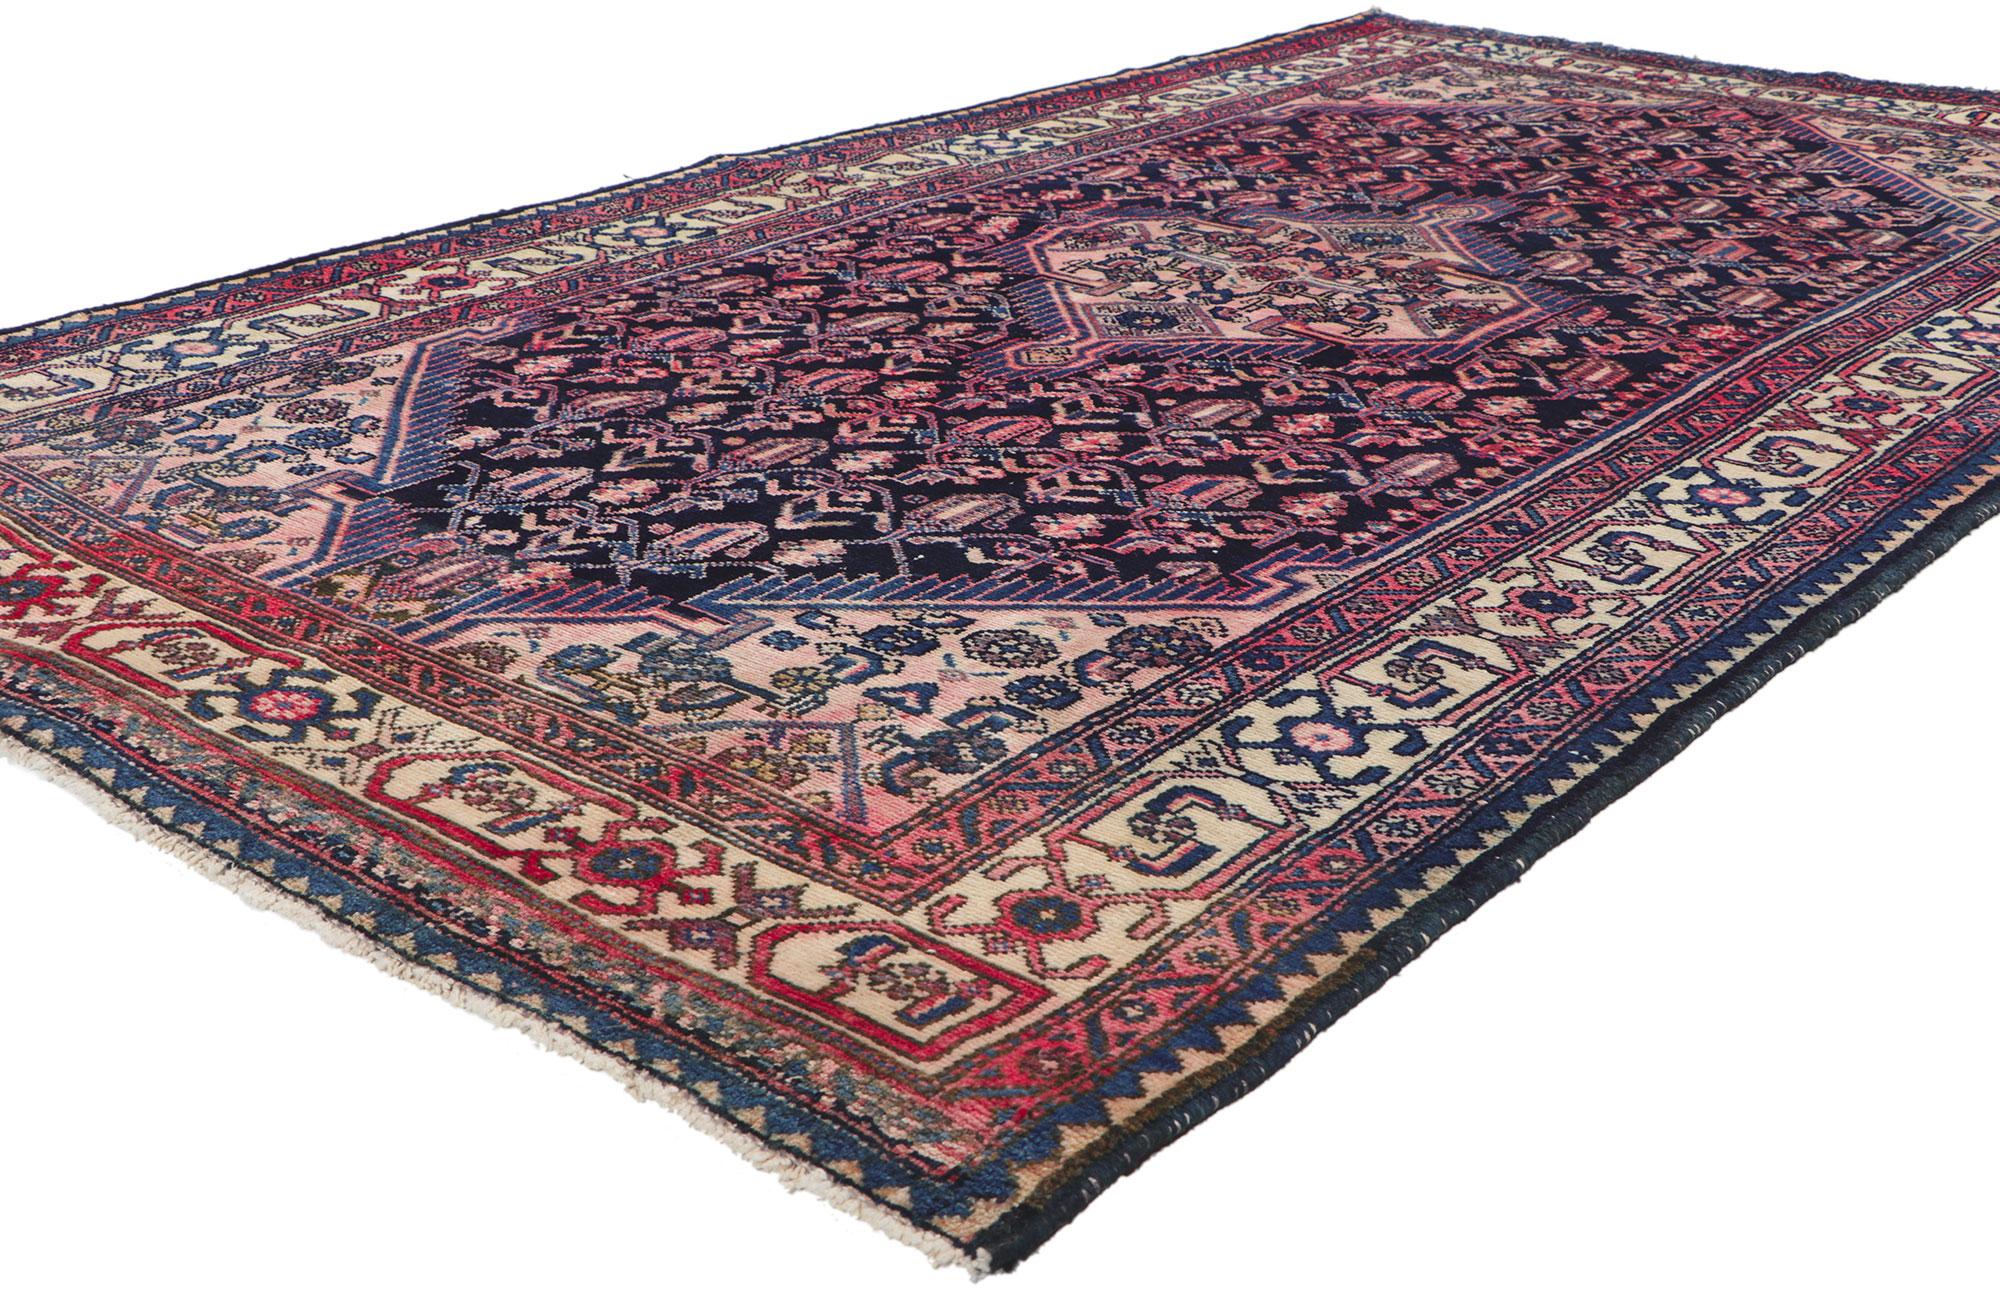 61122 Vintage Persian Hamadan Rug, 04'06 x 07'11.
?With its timeless design, incredible detail and texture, this hand knotted wool vintage Persian Hamadan rug is a captivating vision of woven beauty. The eye-catching boteh trellis and lively